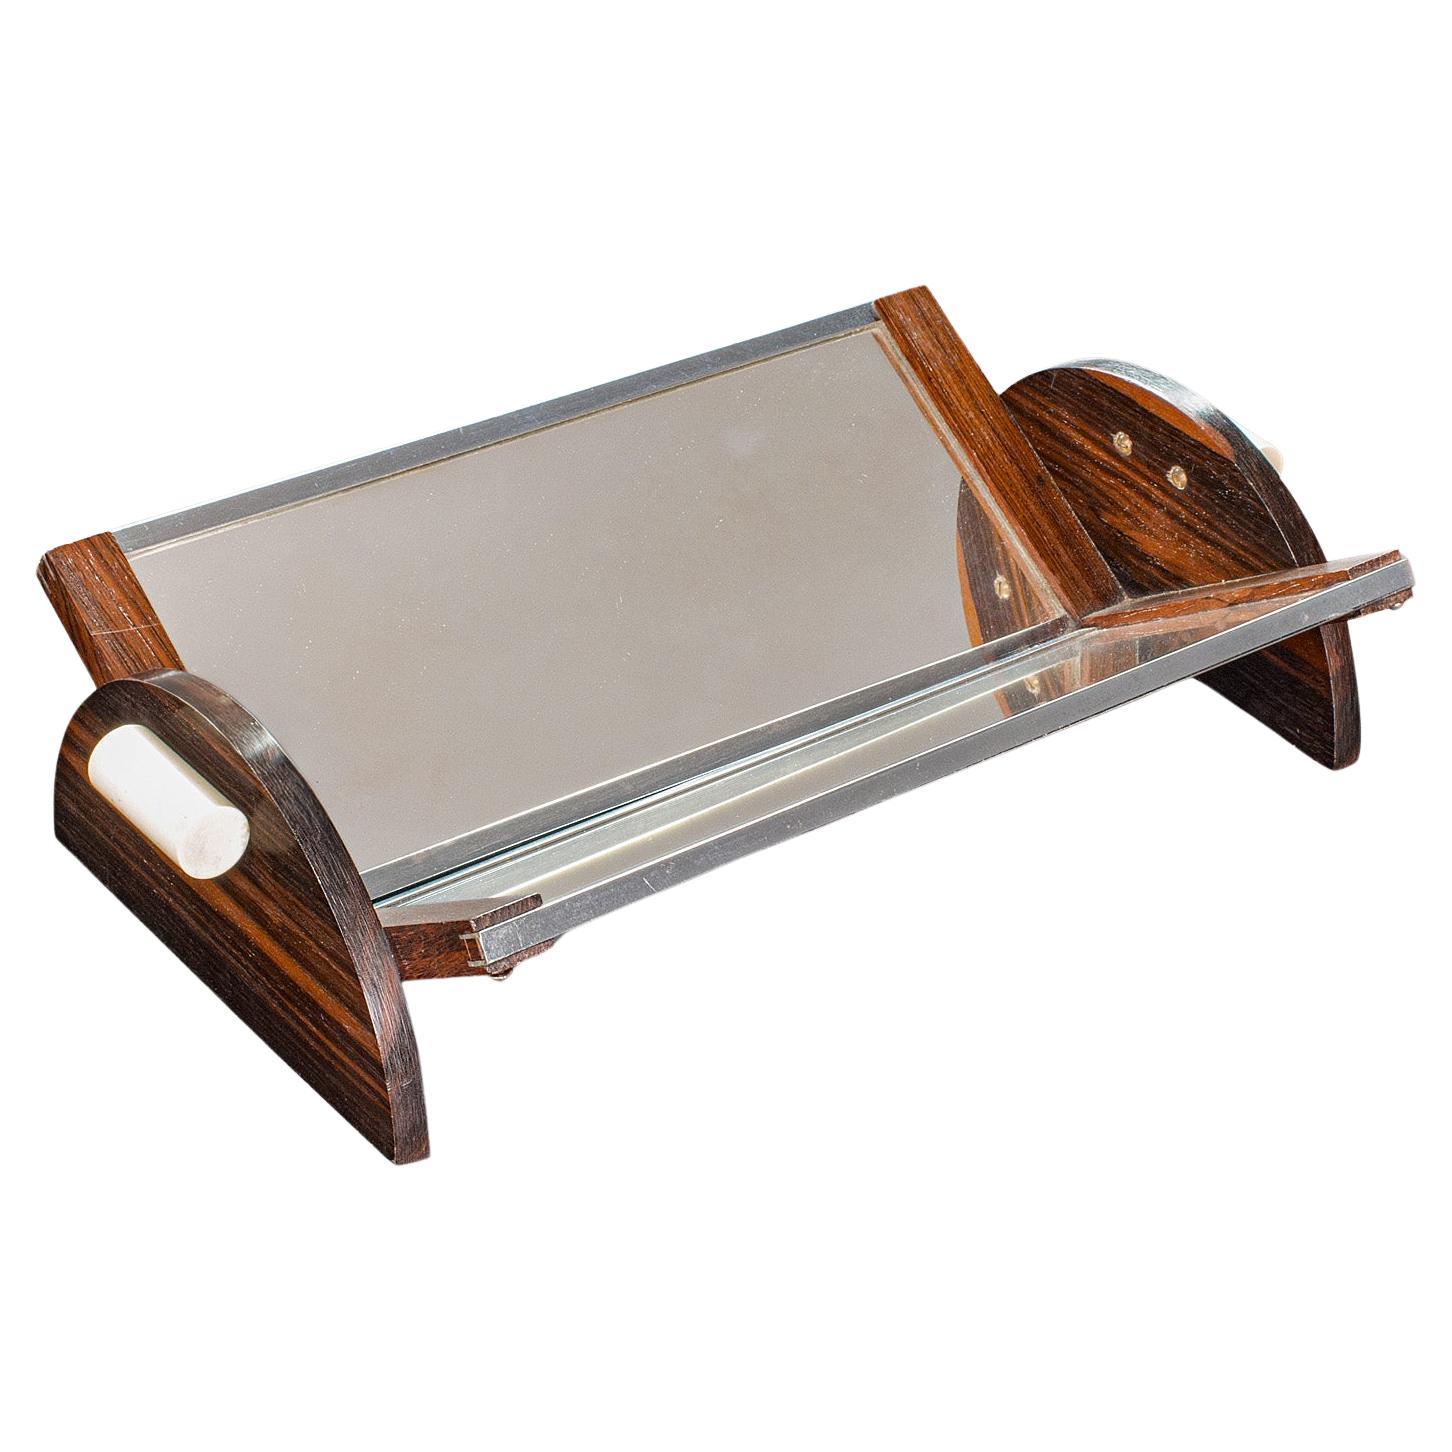 Small Vintage Mirrored Book Trough, English, Novel Rest, Art Deco, Circa 1940 For Sale